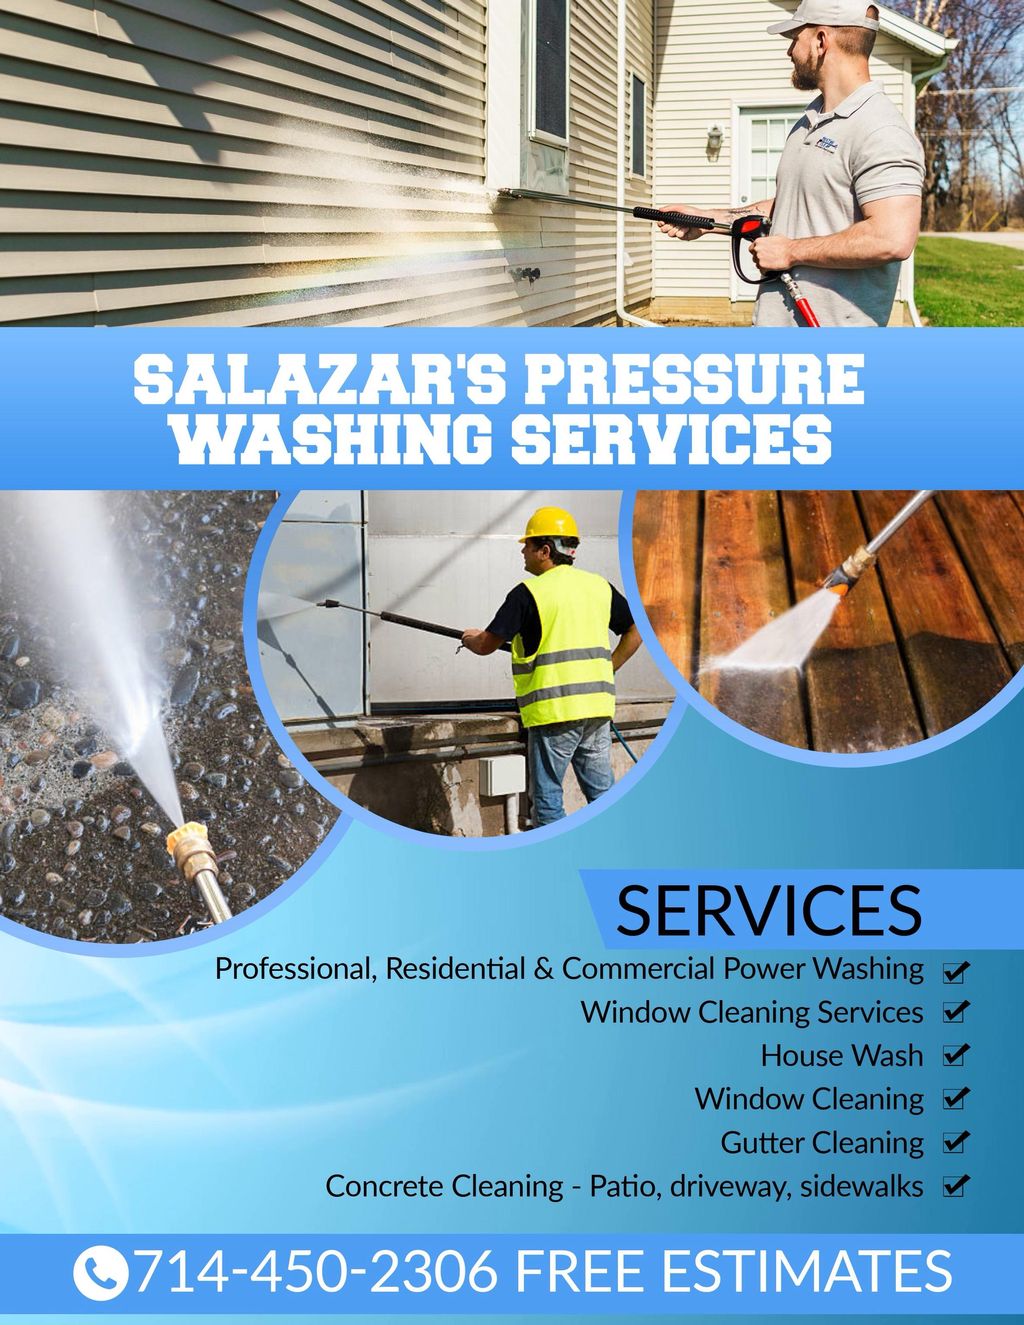 SALAZAR’S CLEANING SERVICES & MORE